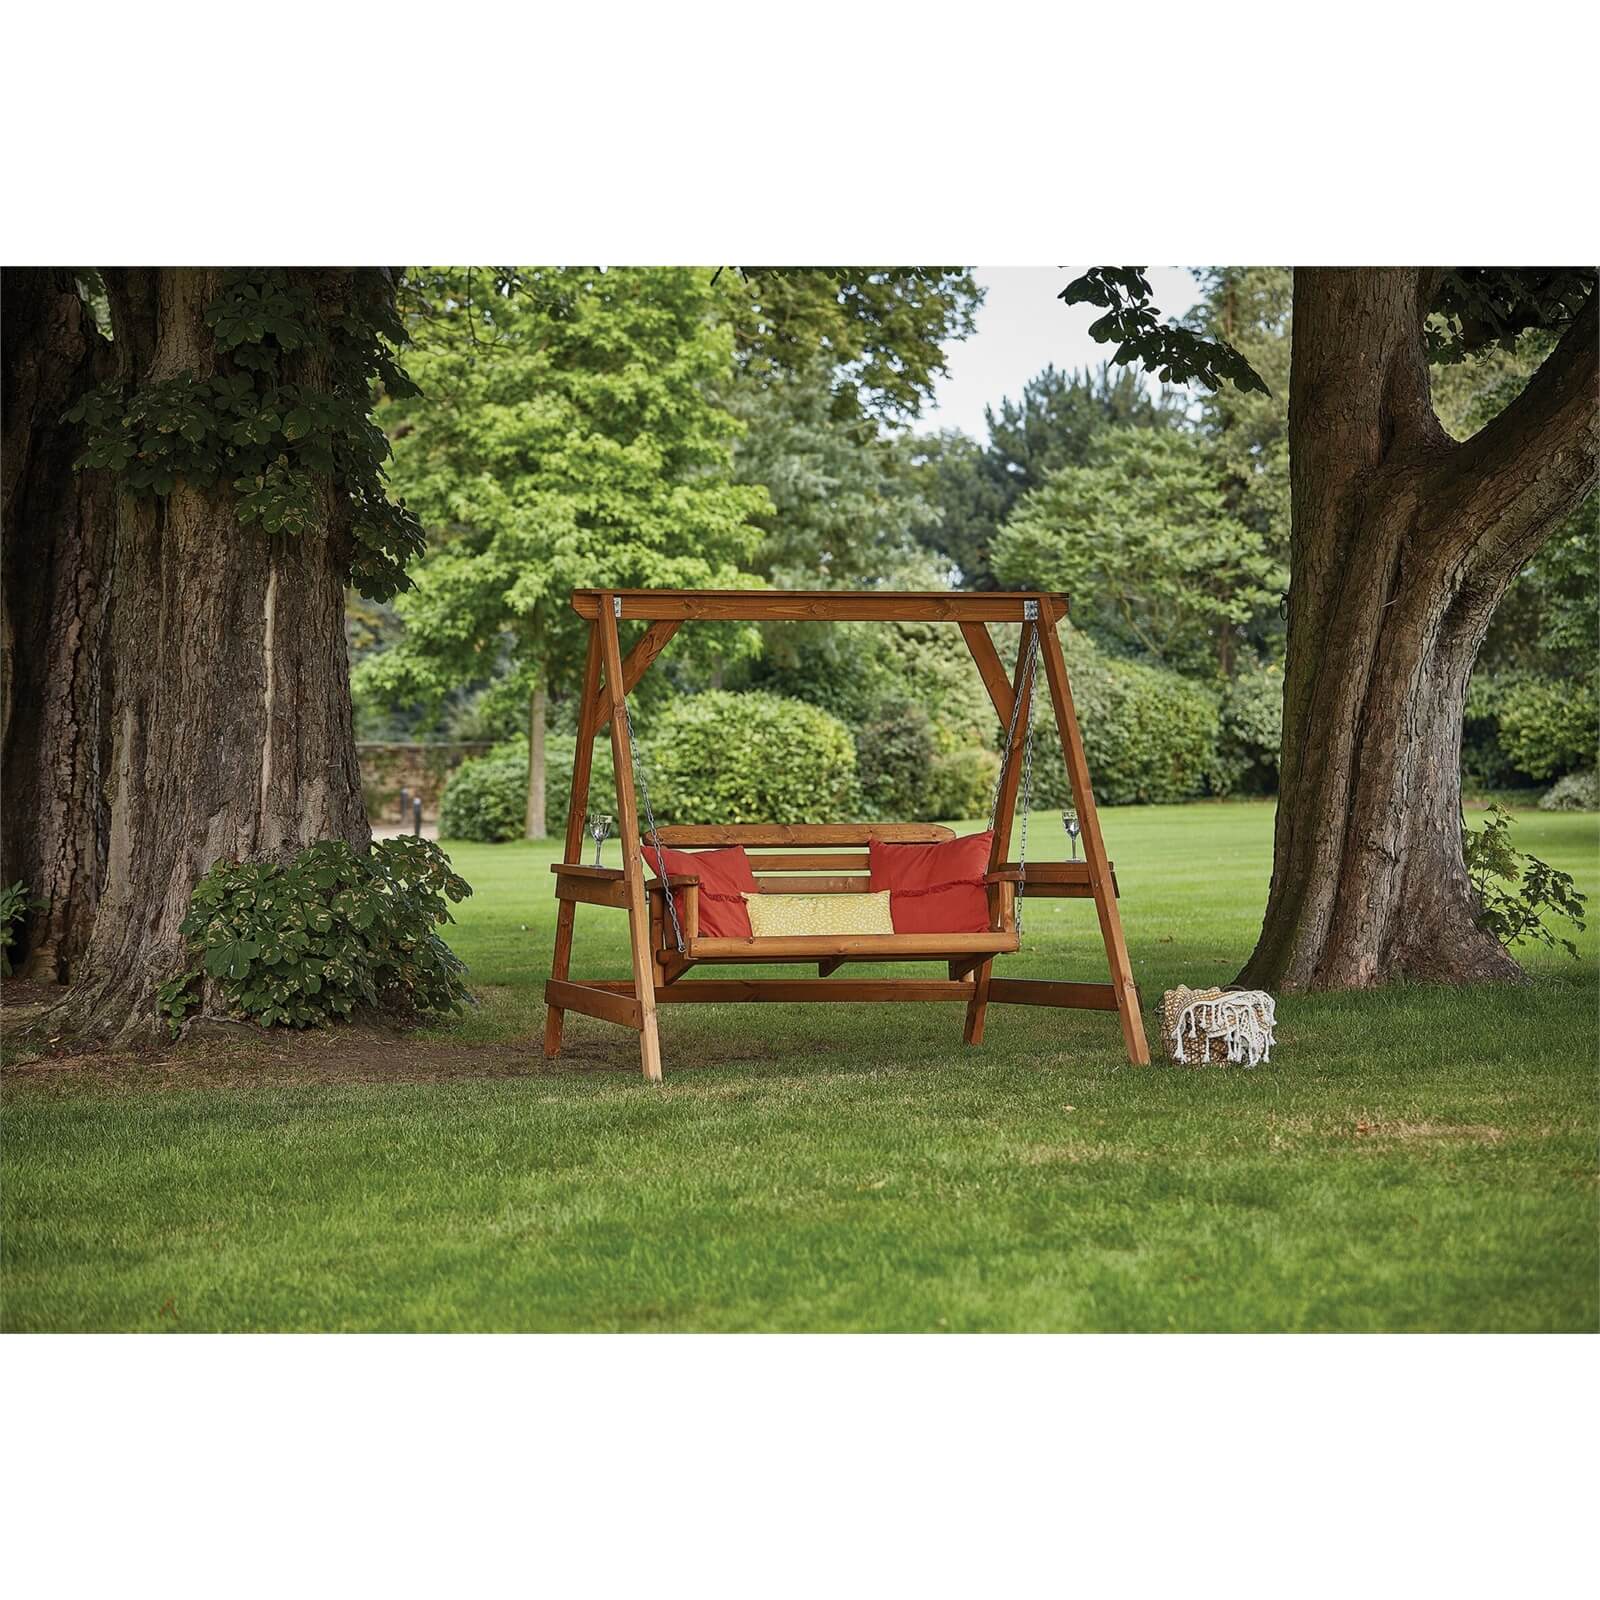 Anchor Fast FSC Rustic Wooden 2 Seater Swing Set